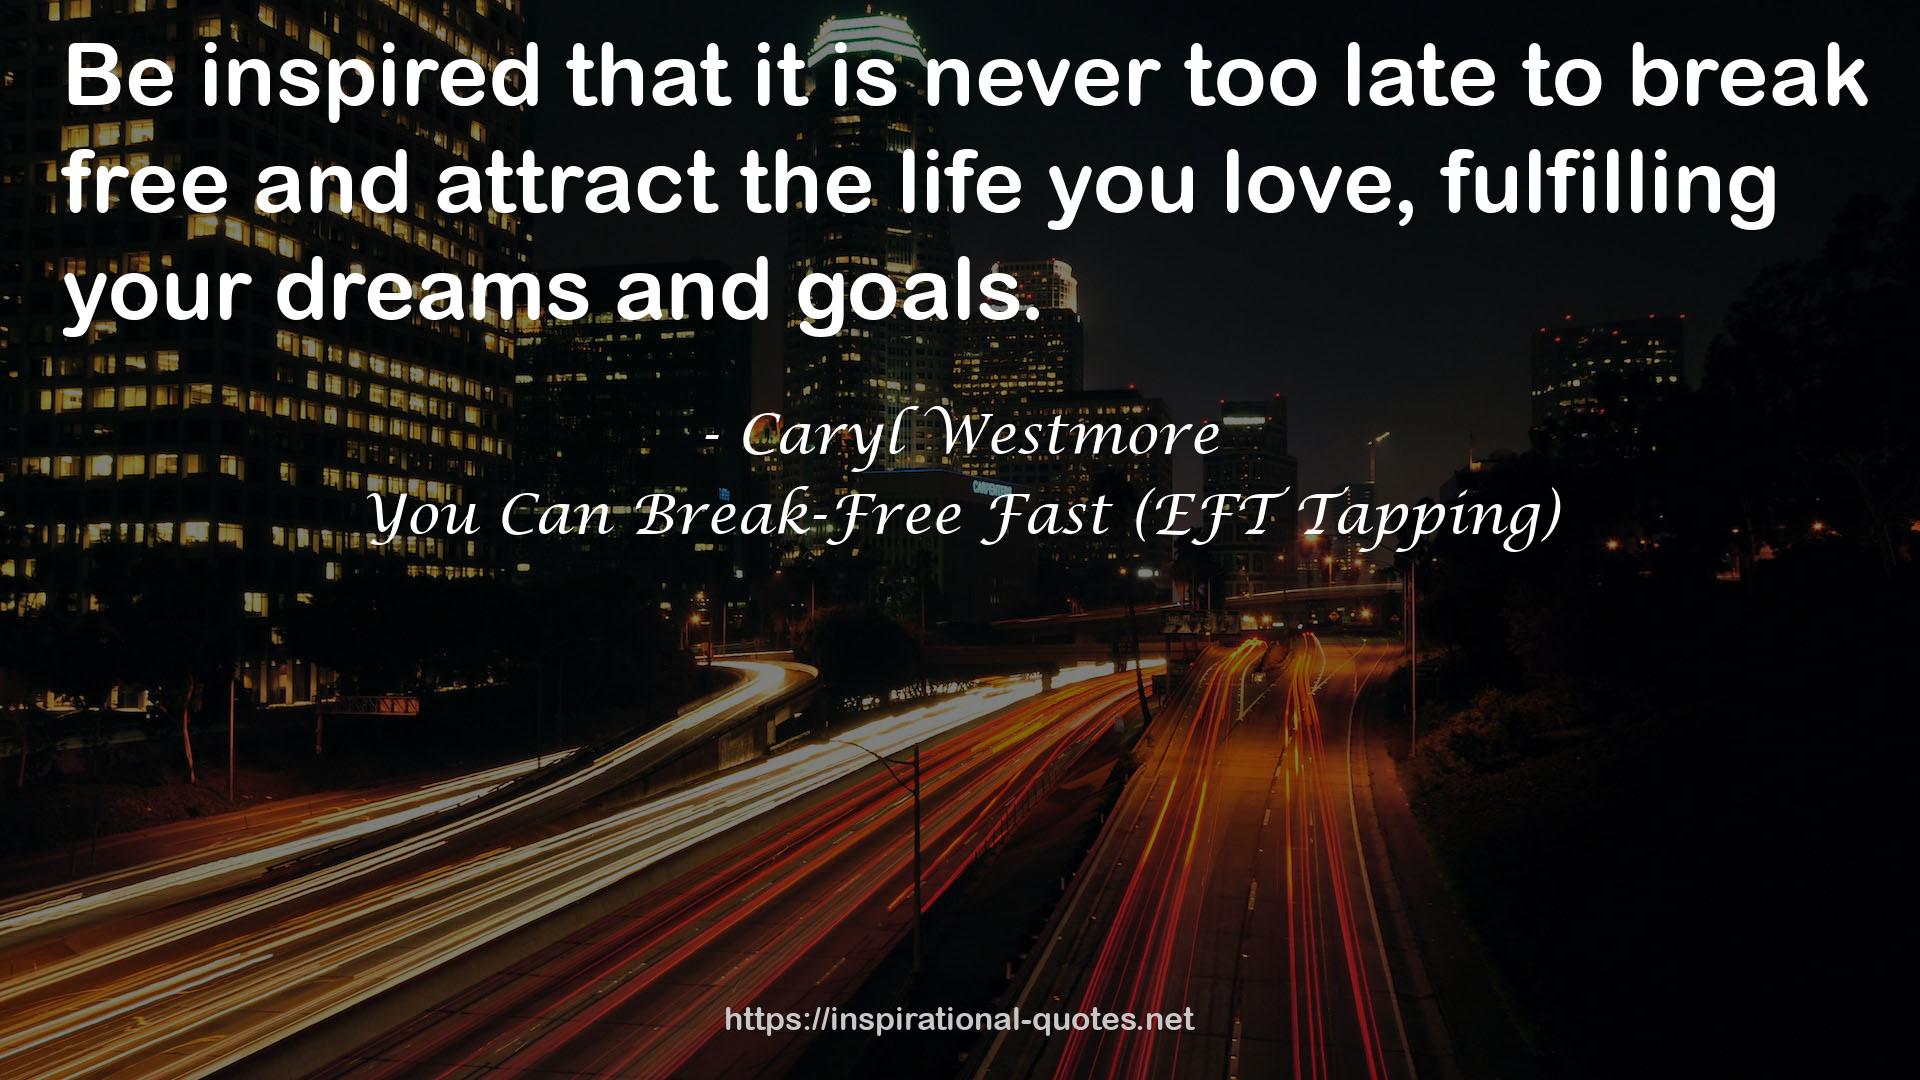 You Can Break-Free Fast (EFT Tapping) QUOTES